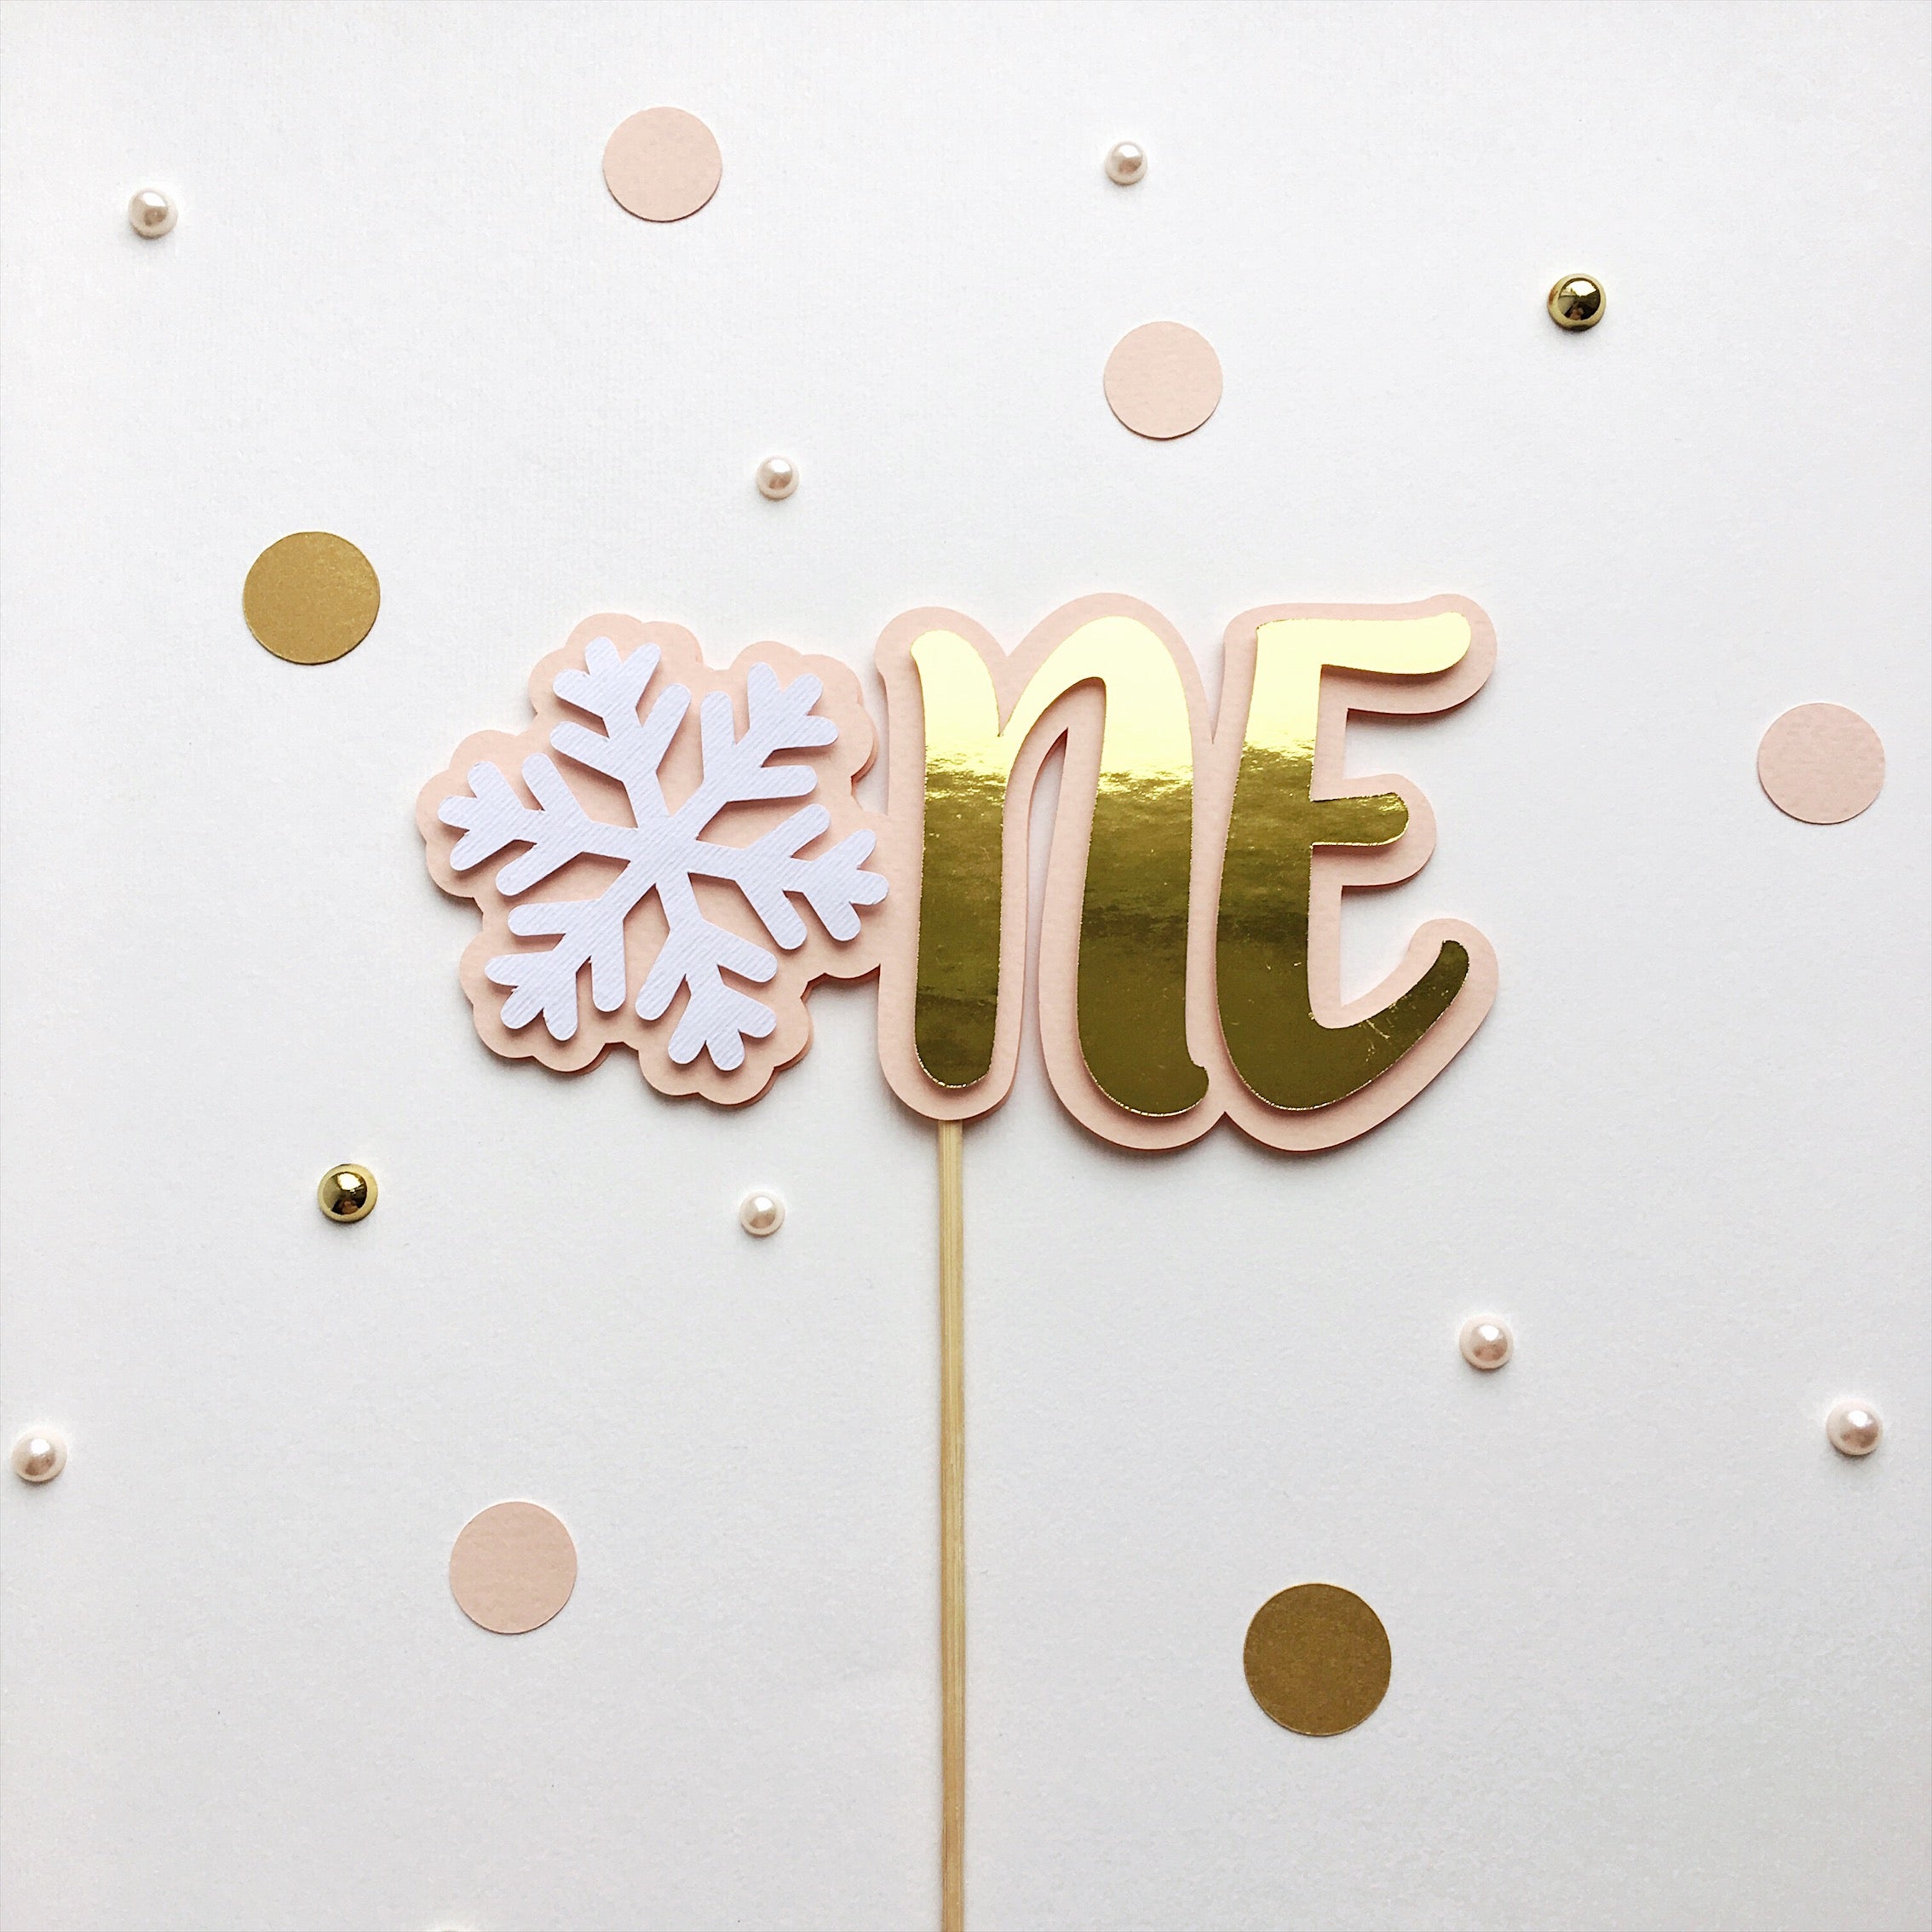 Winter Onederland Cake Topper Christmas Holiday Birthday Winter Baby Shower Winter Onederland Oh What Fun it is to be One party